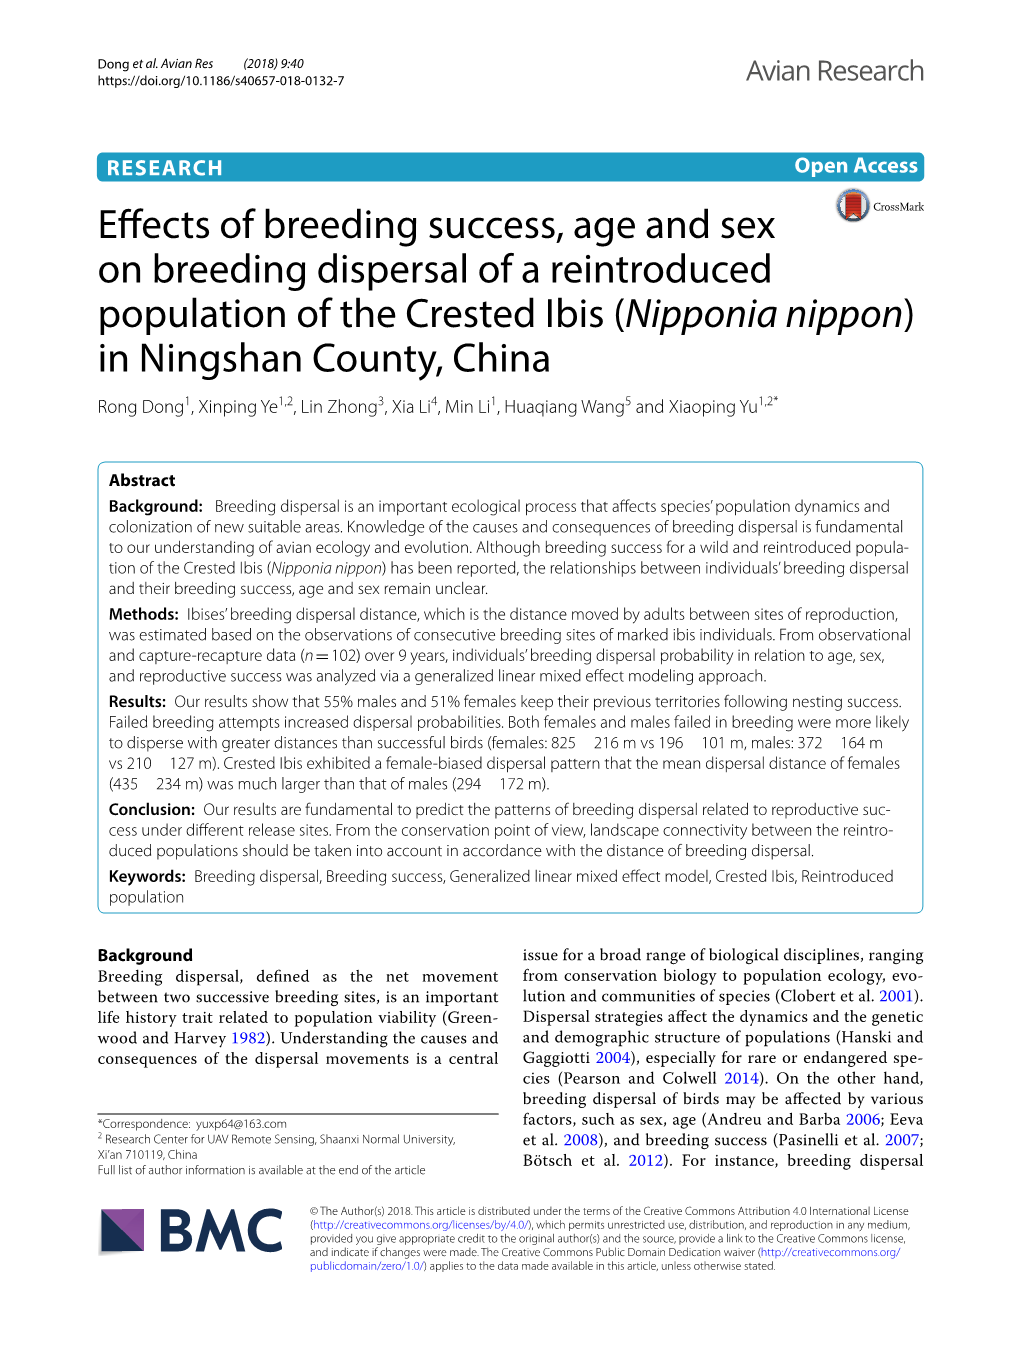 Effects of Breeding Success, Age and Sex on Breeding Dispersal of A